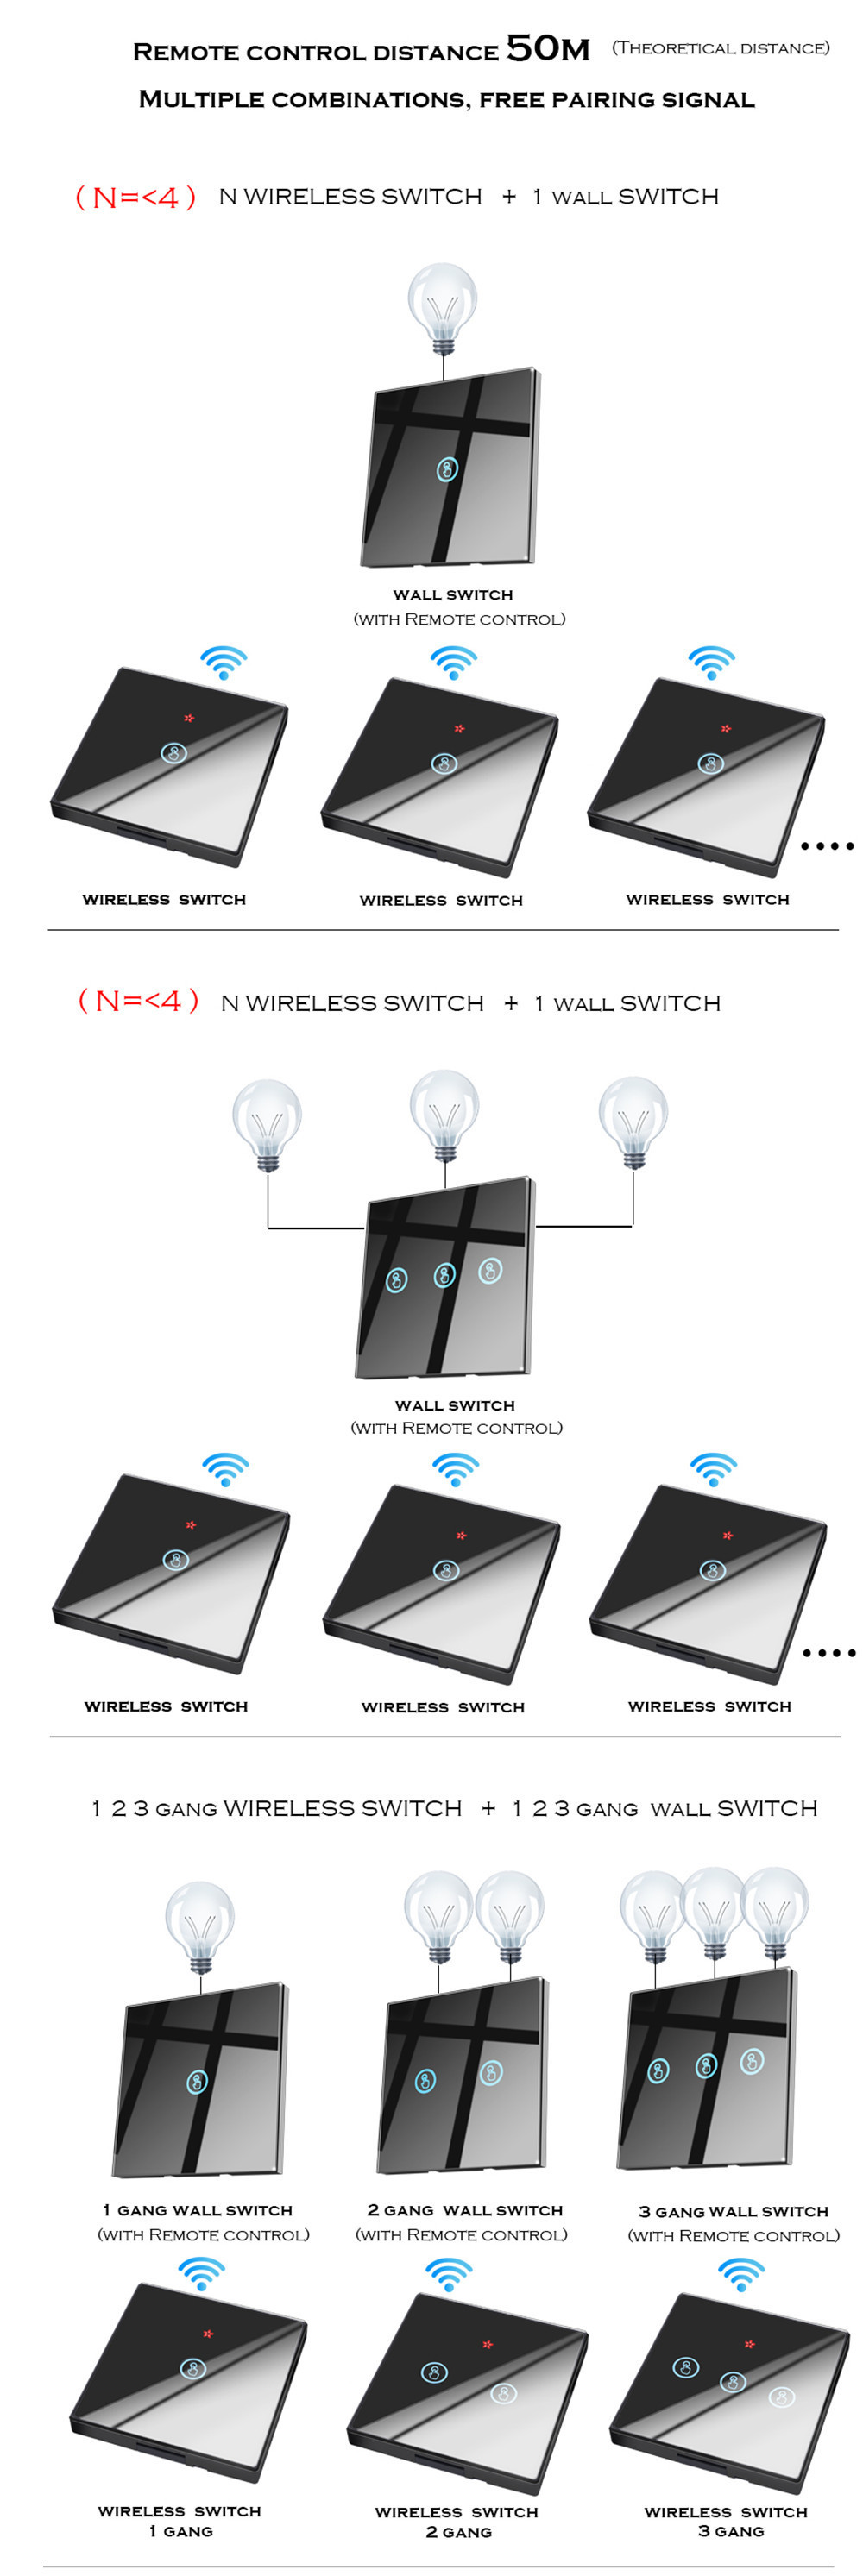 SMATRUL-White-Smart-Wireless-Touch-Switch-Light-433MHZ-Wall-RF-Remote-Control-Glass-Screen-Wall-Pane-1661265-9